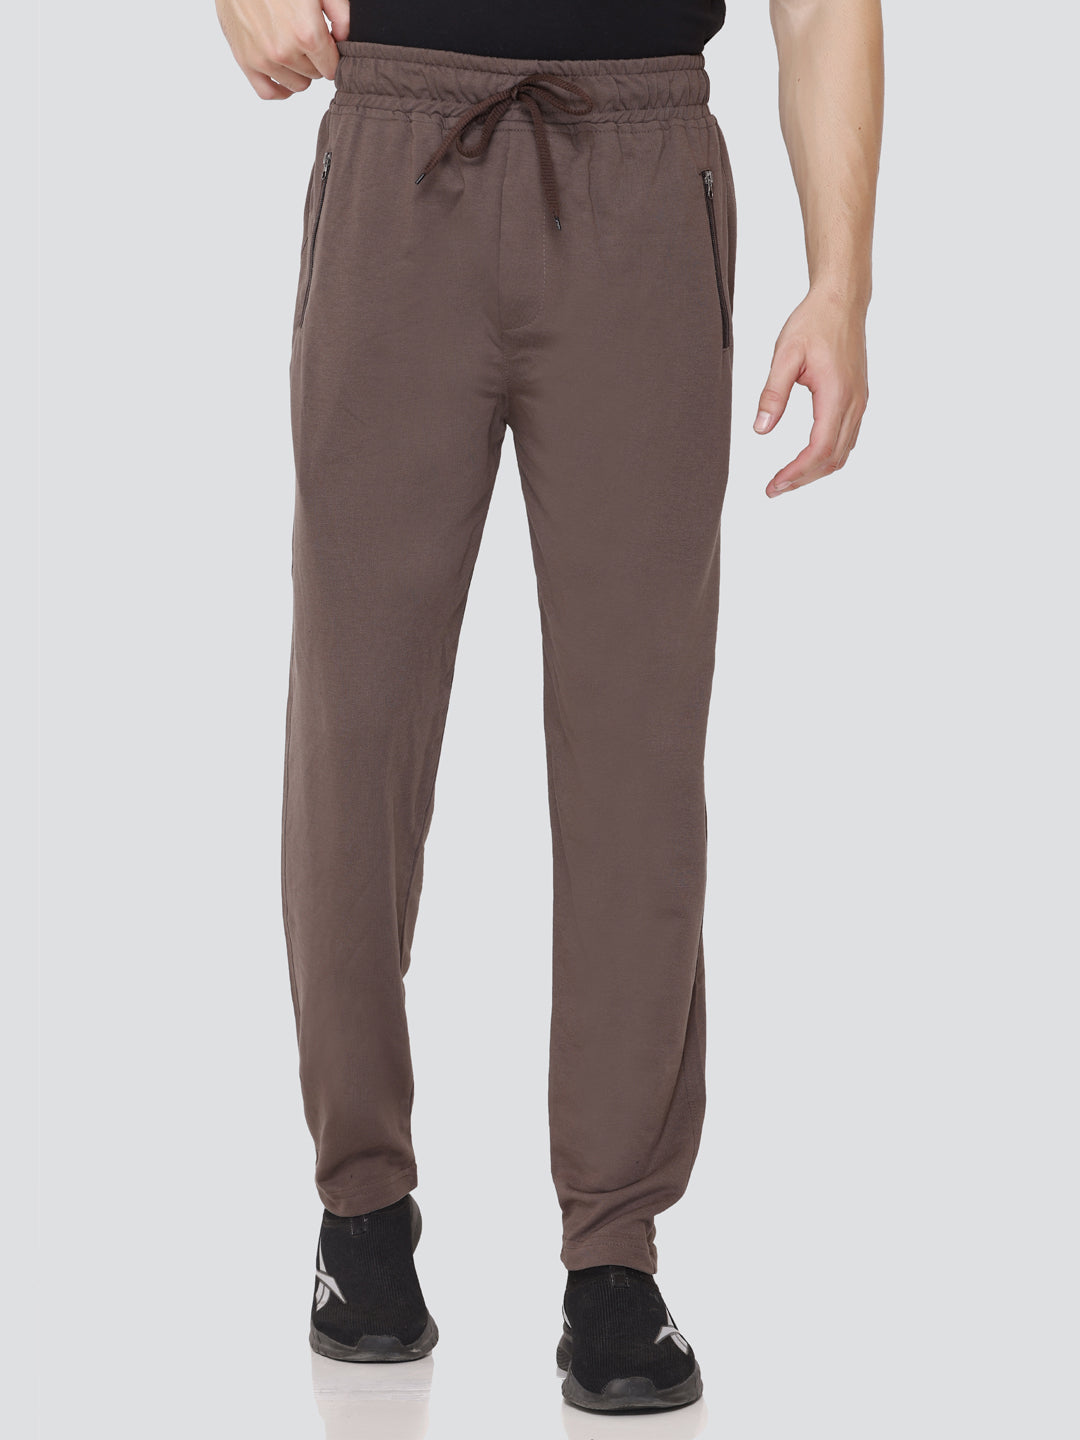 Buy Comfortable Olive Jinxer Plus Size Cotton Trackpants for Men online -  Cupidclothings – Cupid Clothings